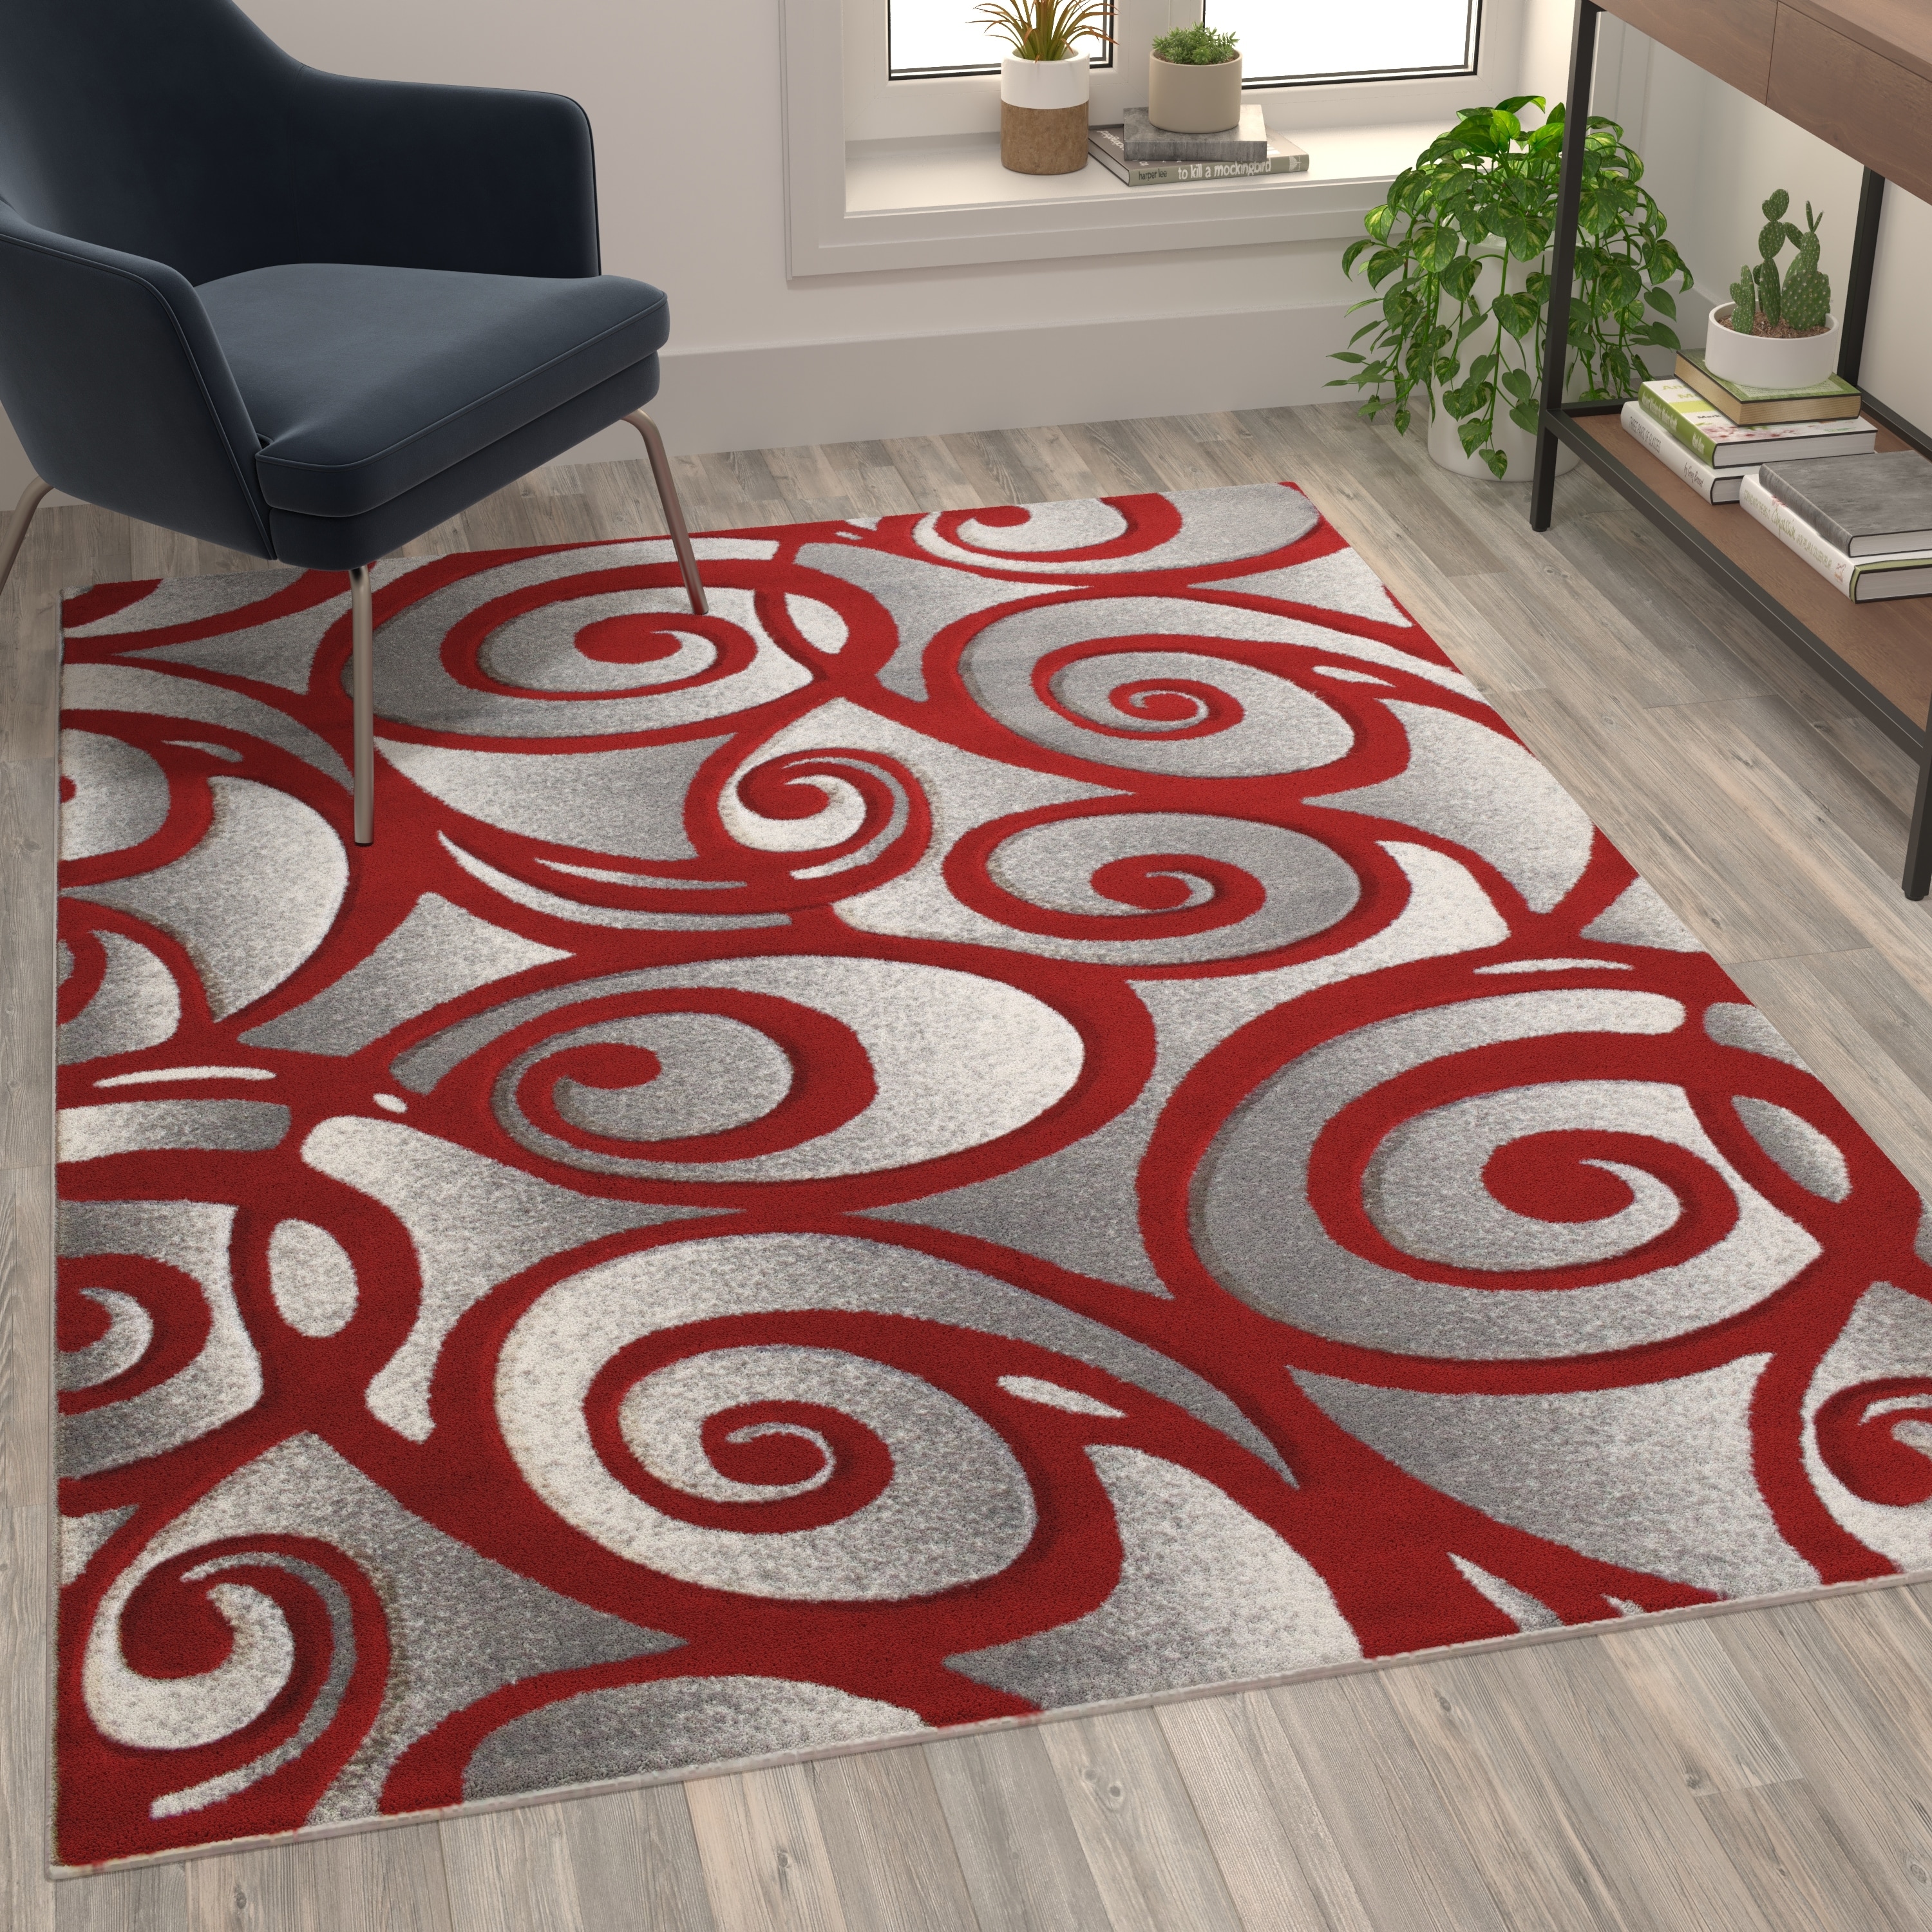 https://ak1.ostkcdn.com/images/products/is/images/direct/2ac4312791cc3ea59b20cfb8db284ceb71bd0046/Swirled-High-Low-Pile-Sculpted-Multipurpose-Area-Rug.jpg